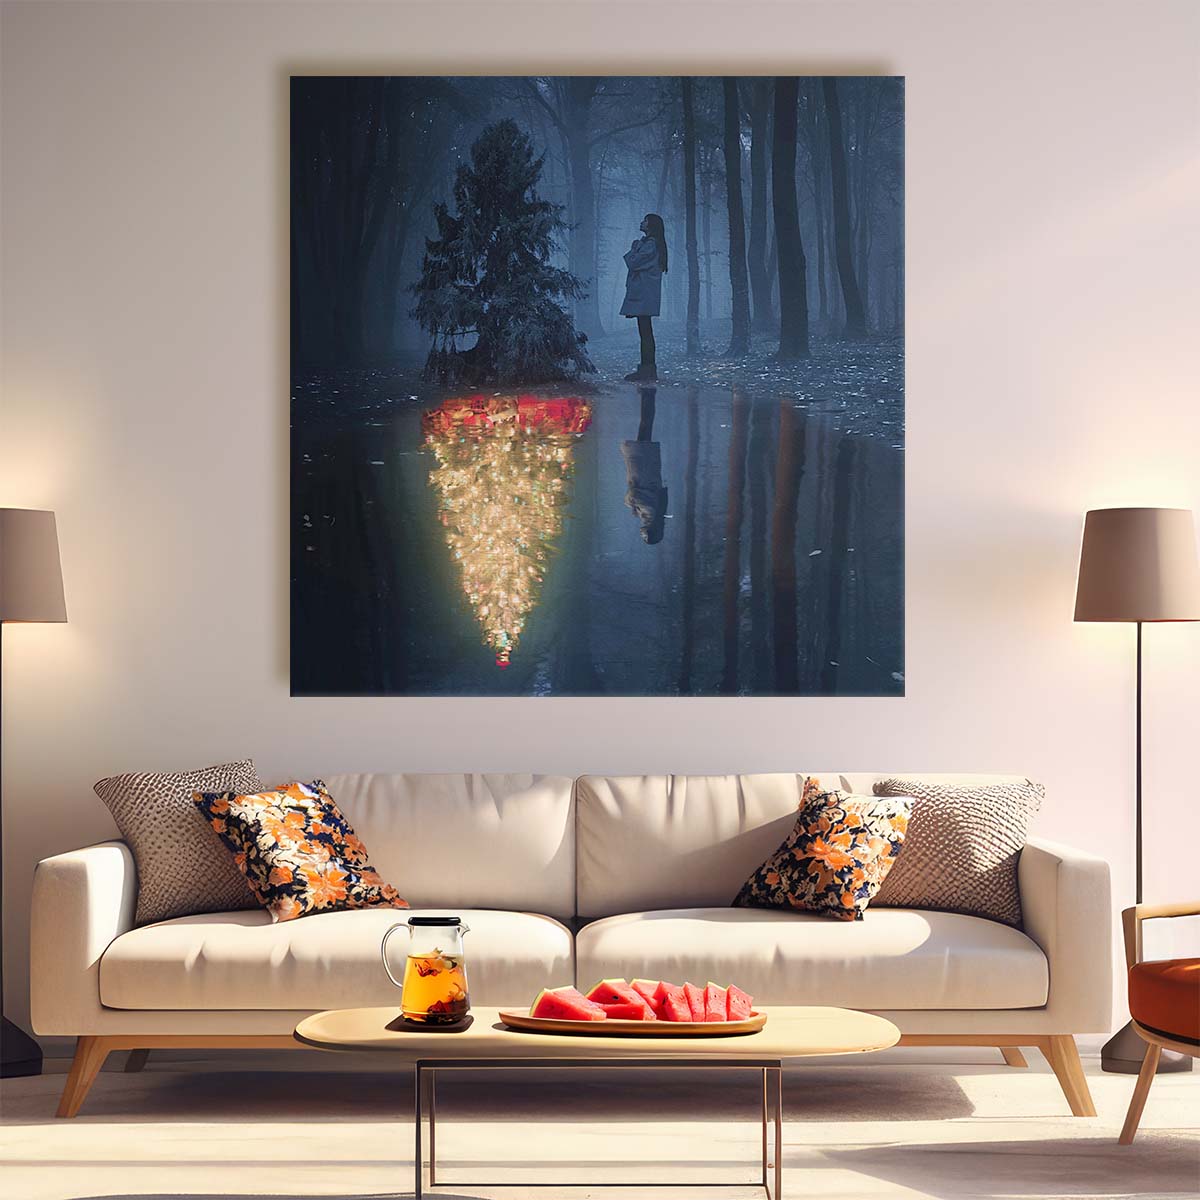 Enchanted Winter Wonderland Snowy Forest Dream Reflection Photography Wall Art by Luxuriance Designs. Made in USA.